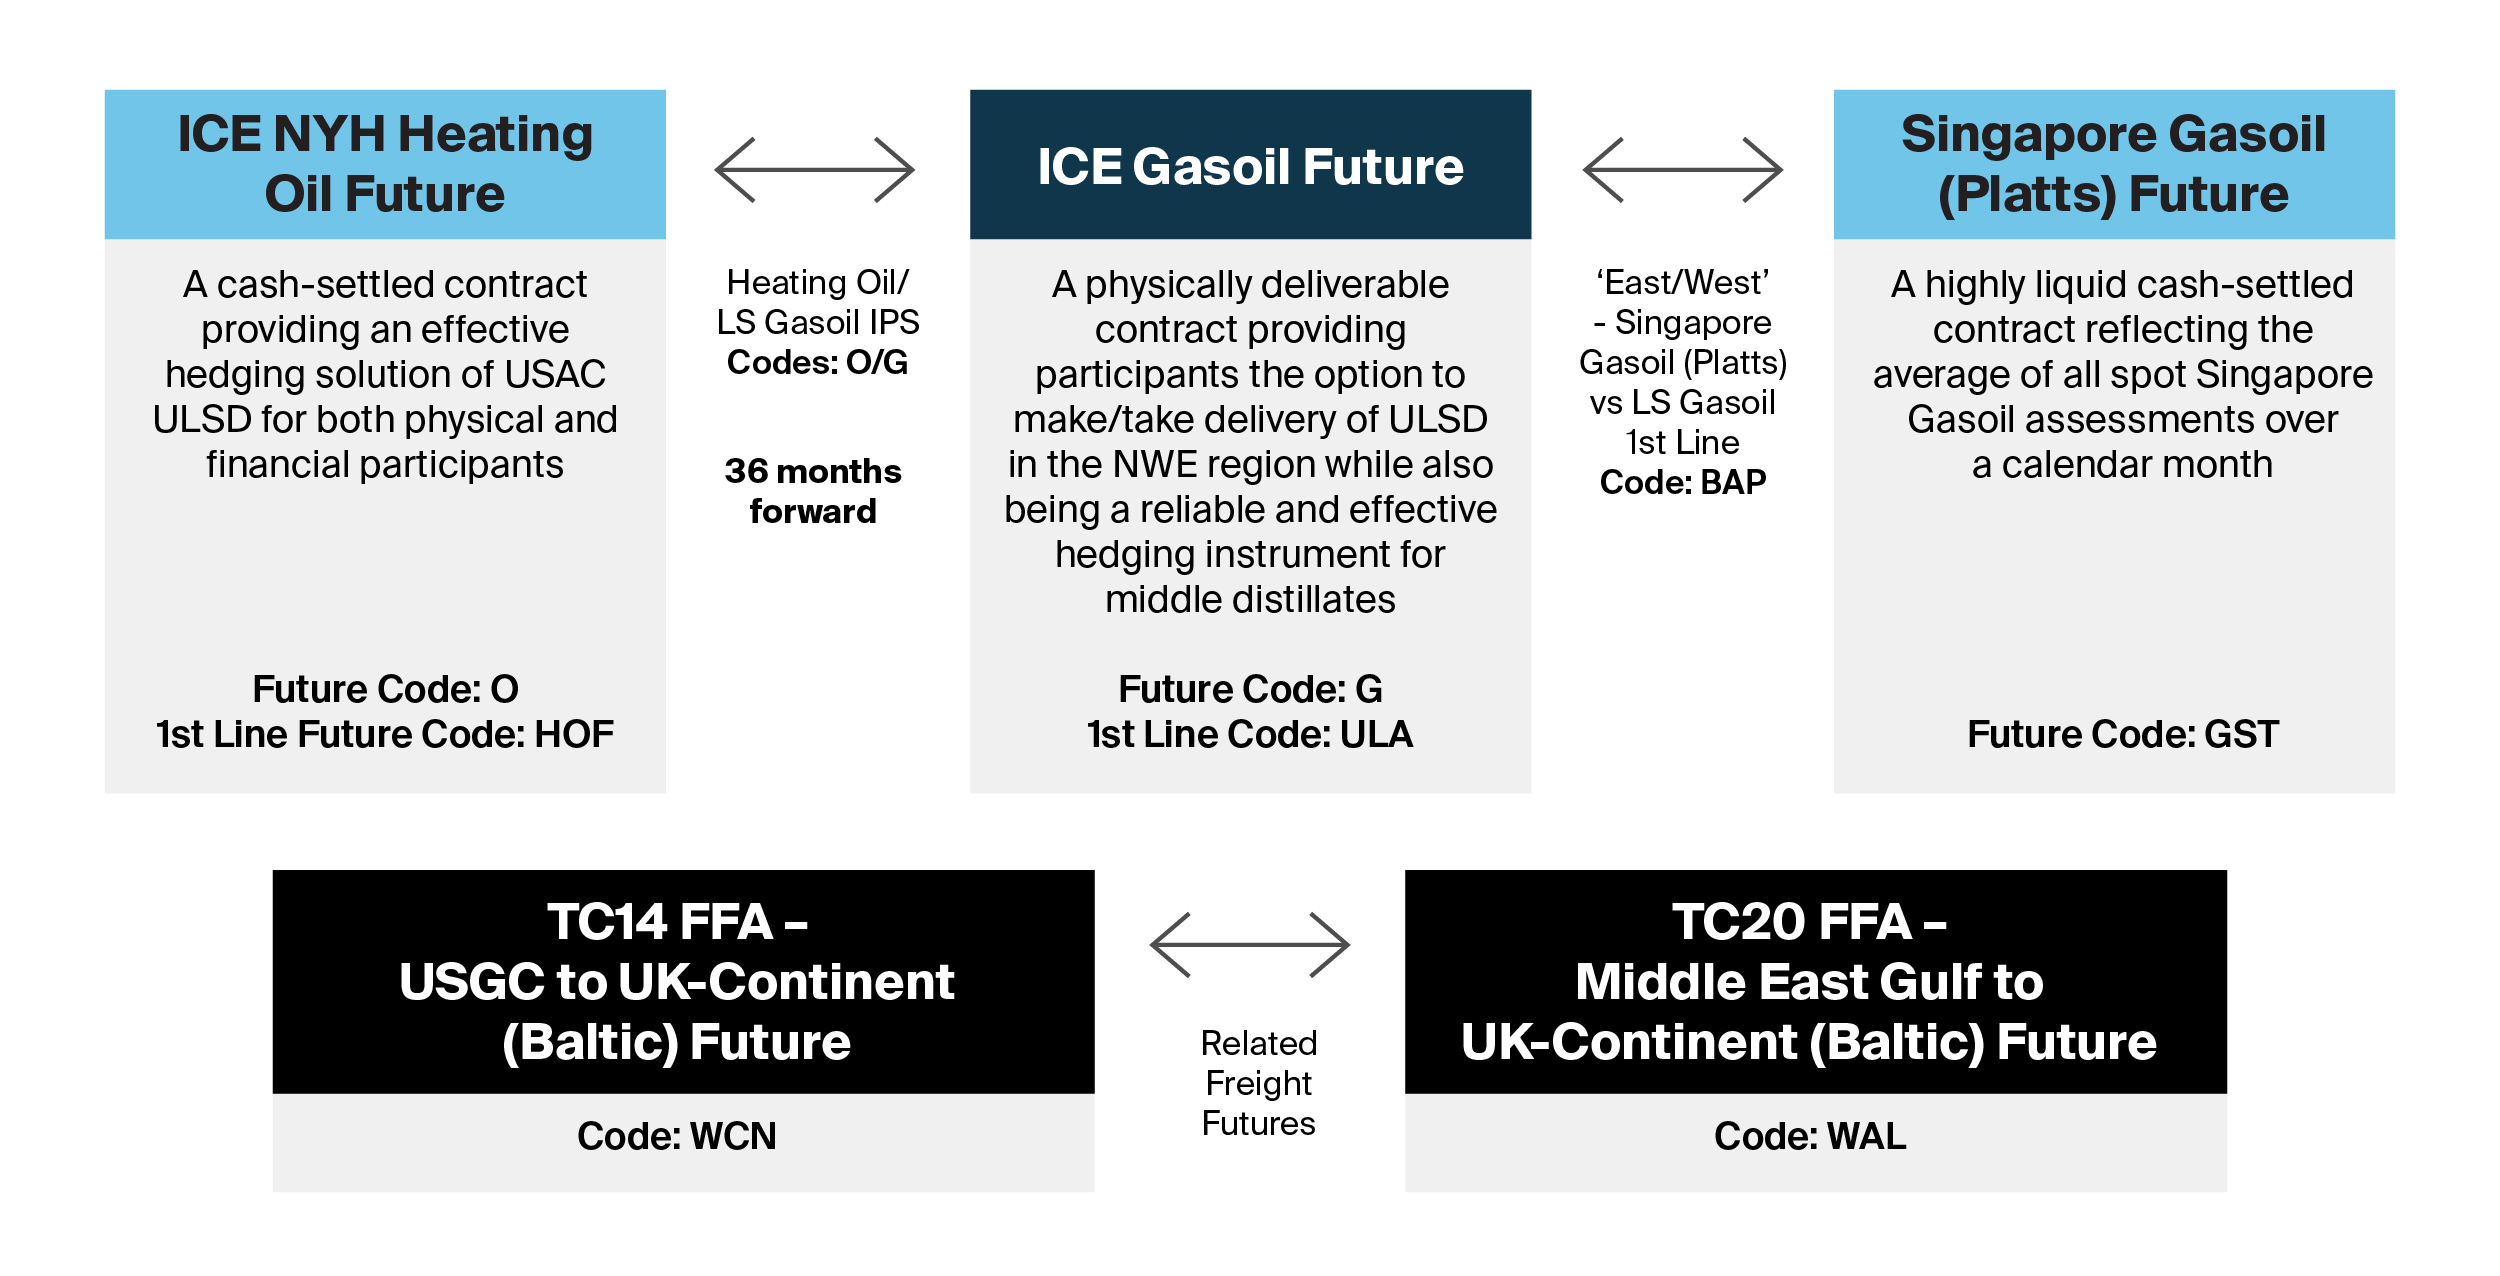 ICE Gasoil at the centre of global middle distillates trading